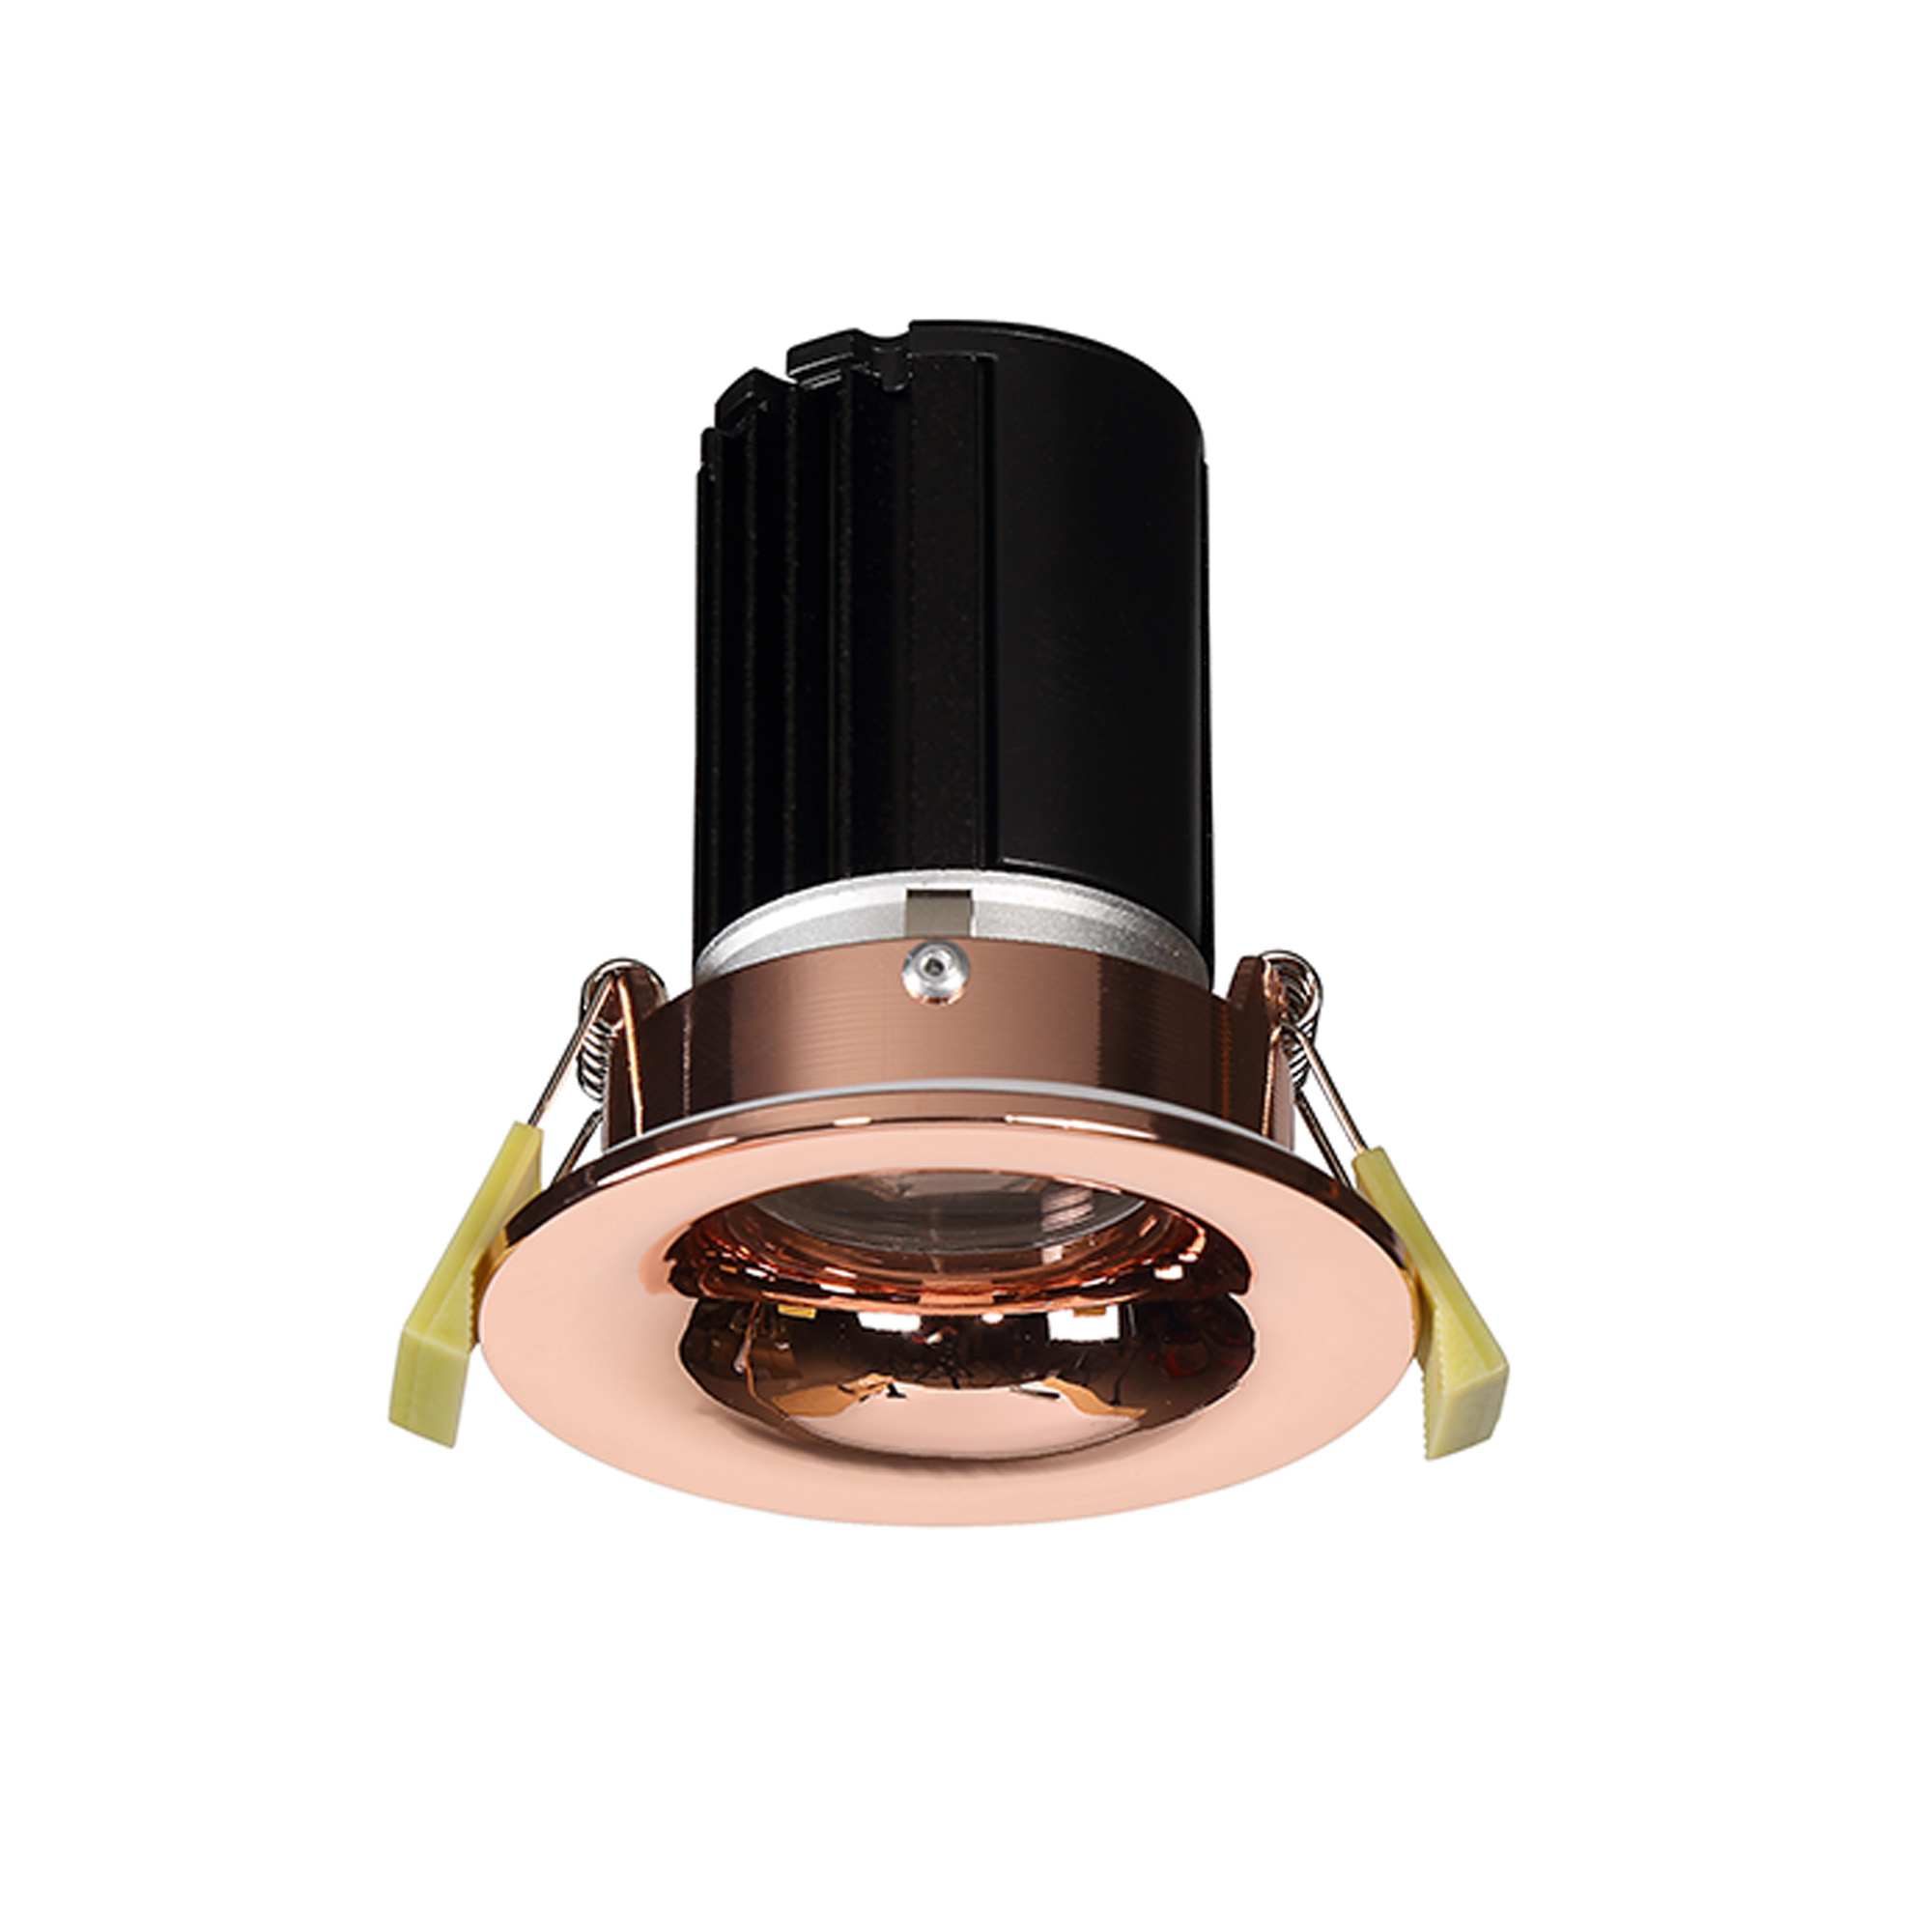 DM201570  Bruve 12 Tridonic powered 12W 2700K 1200lm 12° LED Engine,350mA , CRI>90 LED Engine Rose Gold Fixed Round Recessed Downlight, Inner Glass cover, IP65